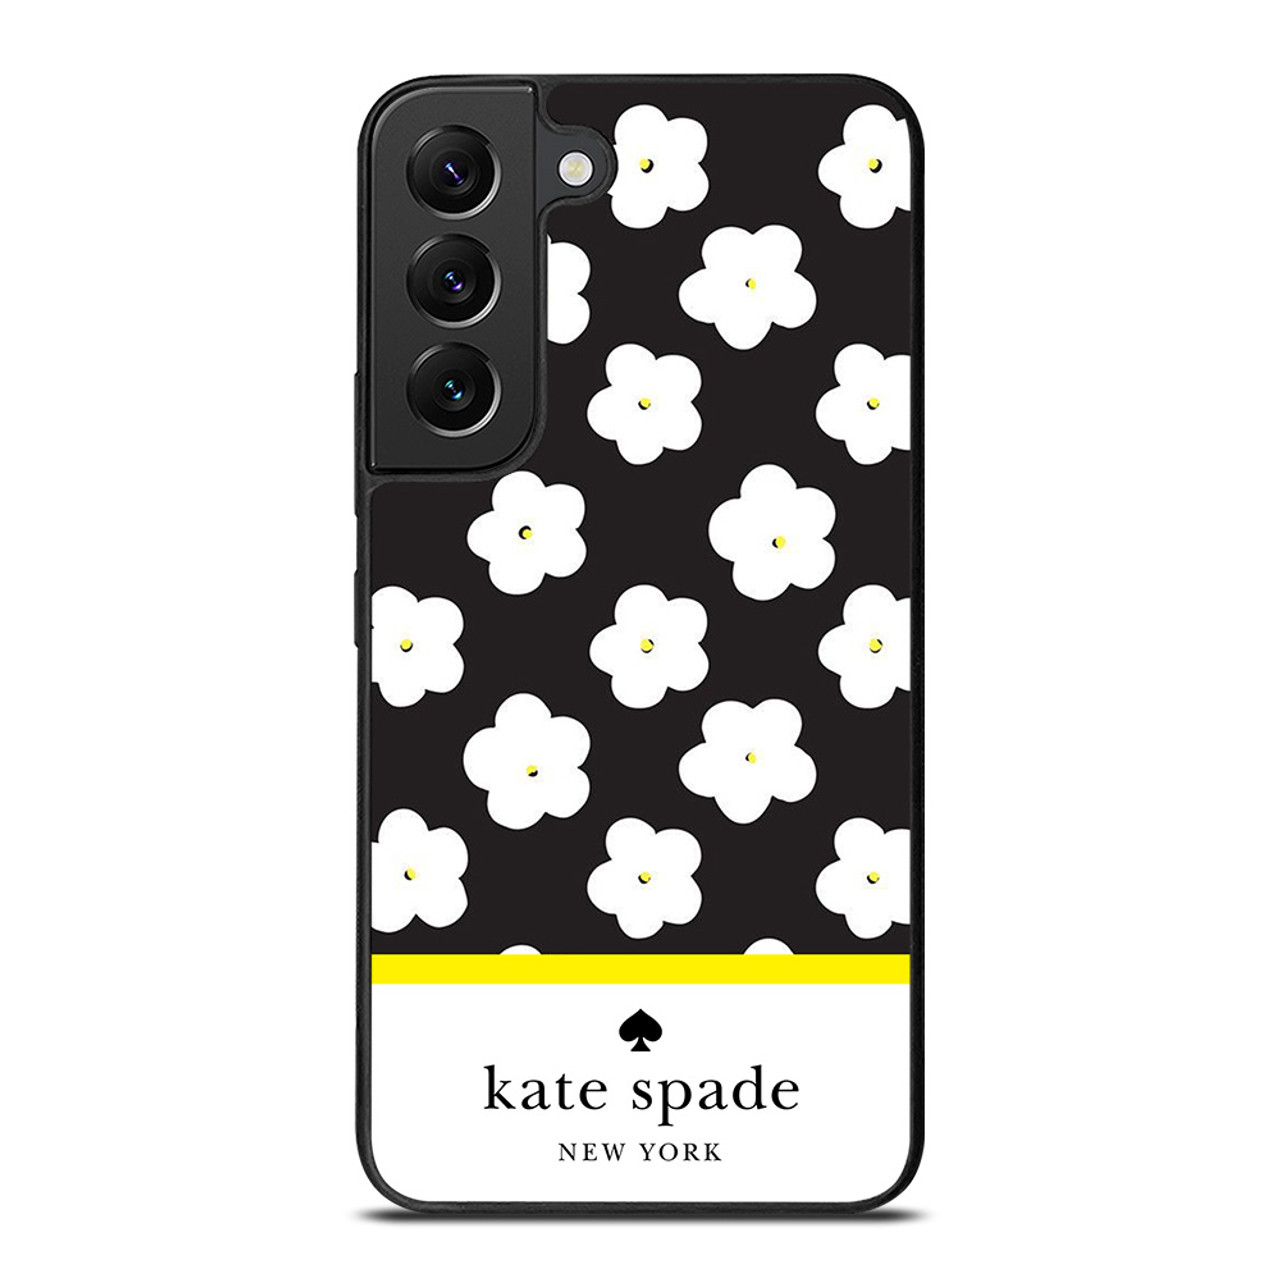 KATE SPADE FLOWER PATTERN 3 Samsung Galaxy S22 Plus Case Cover